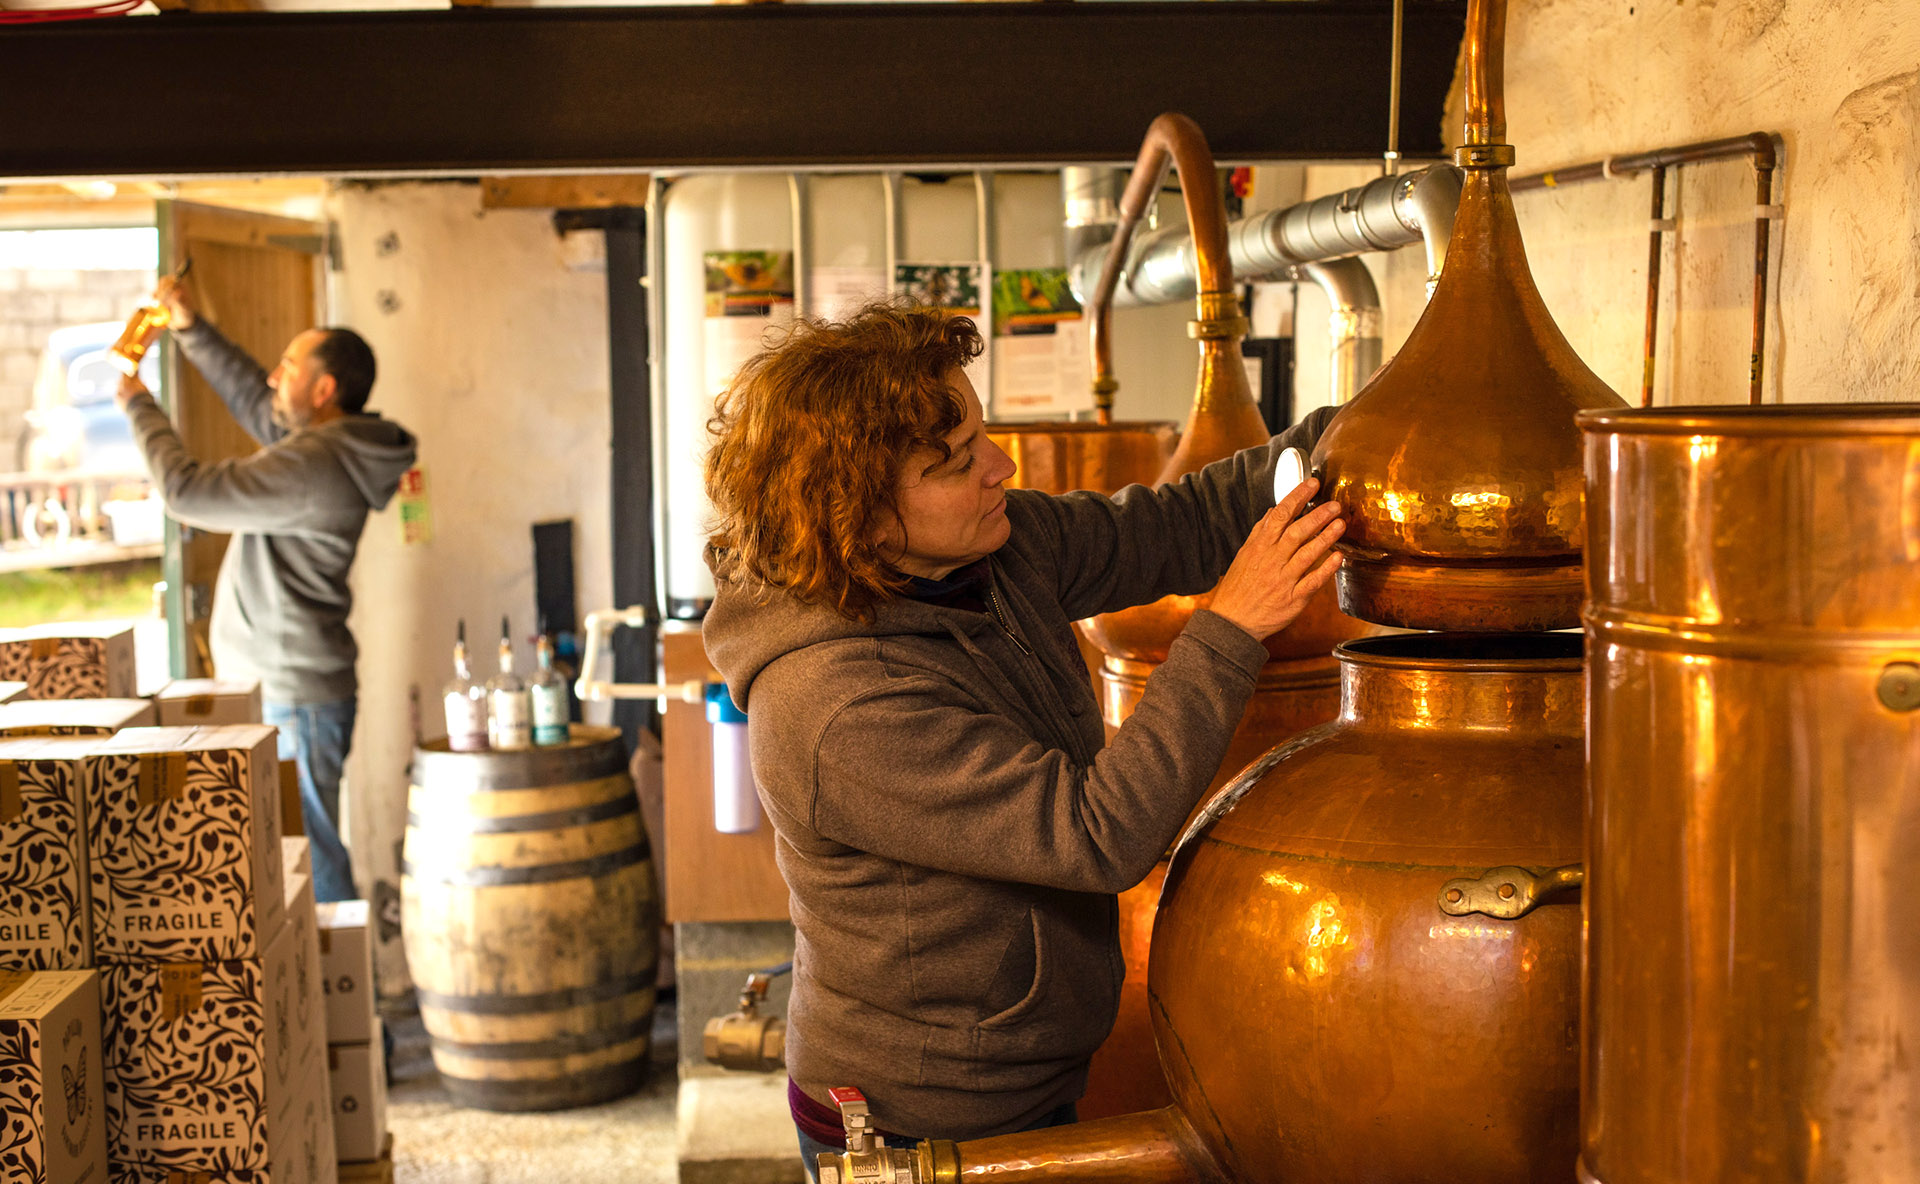 Adam and Claire of Papillon Gin, preparing a batch from copper stills. Using traditional gin botanicals from Dartmoor